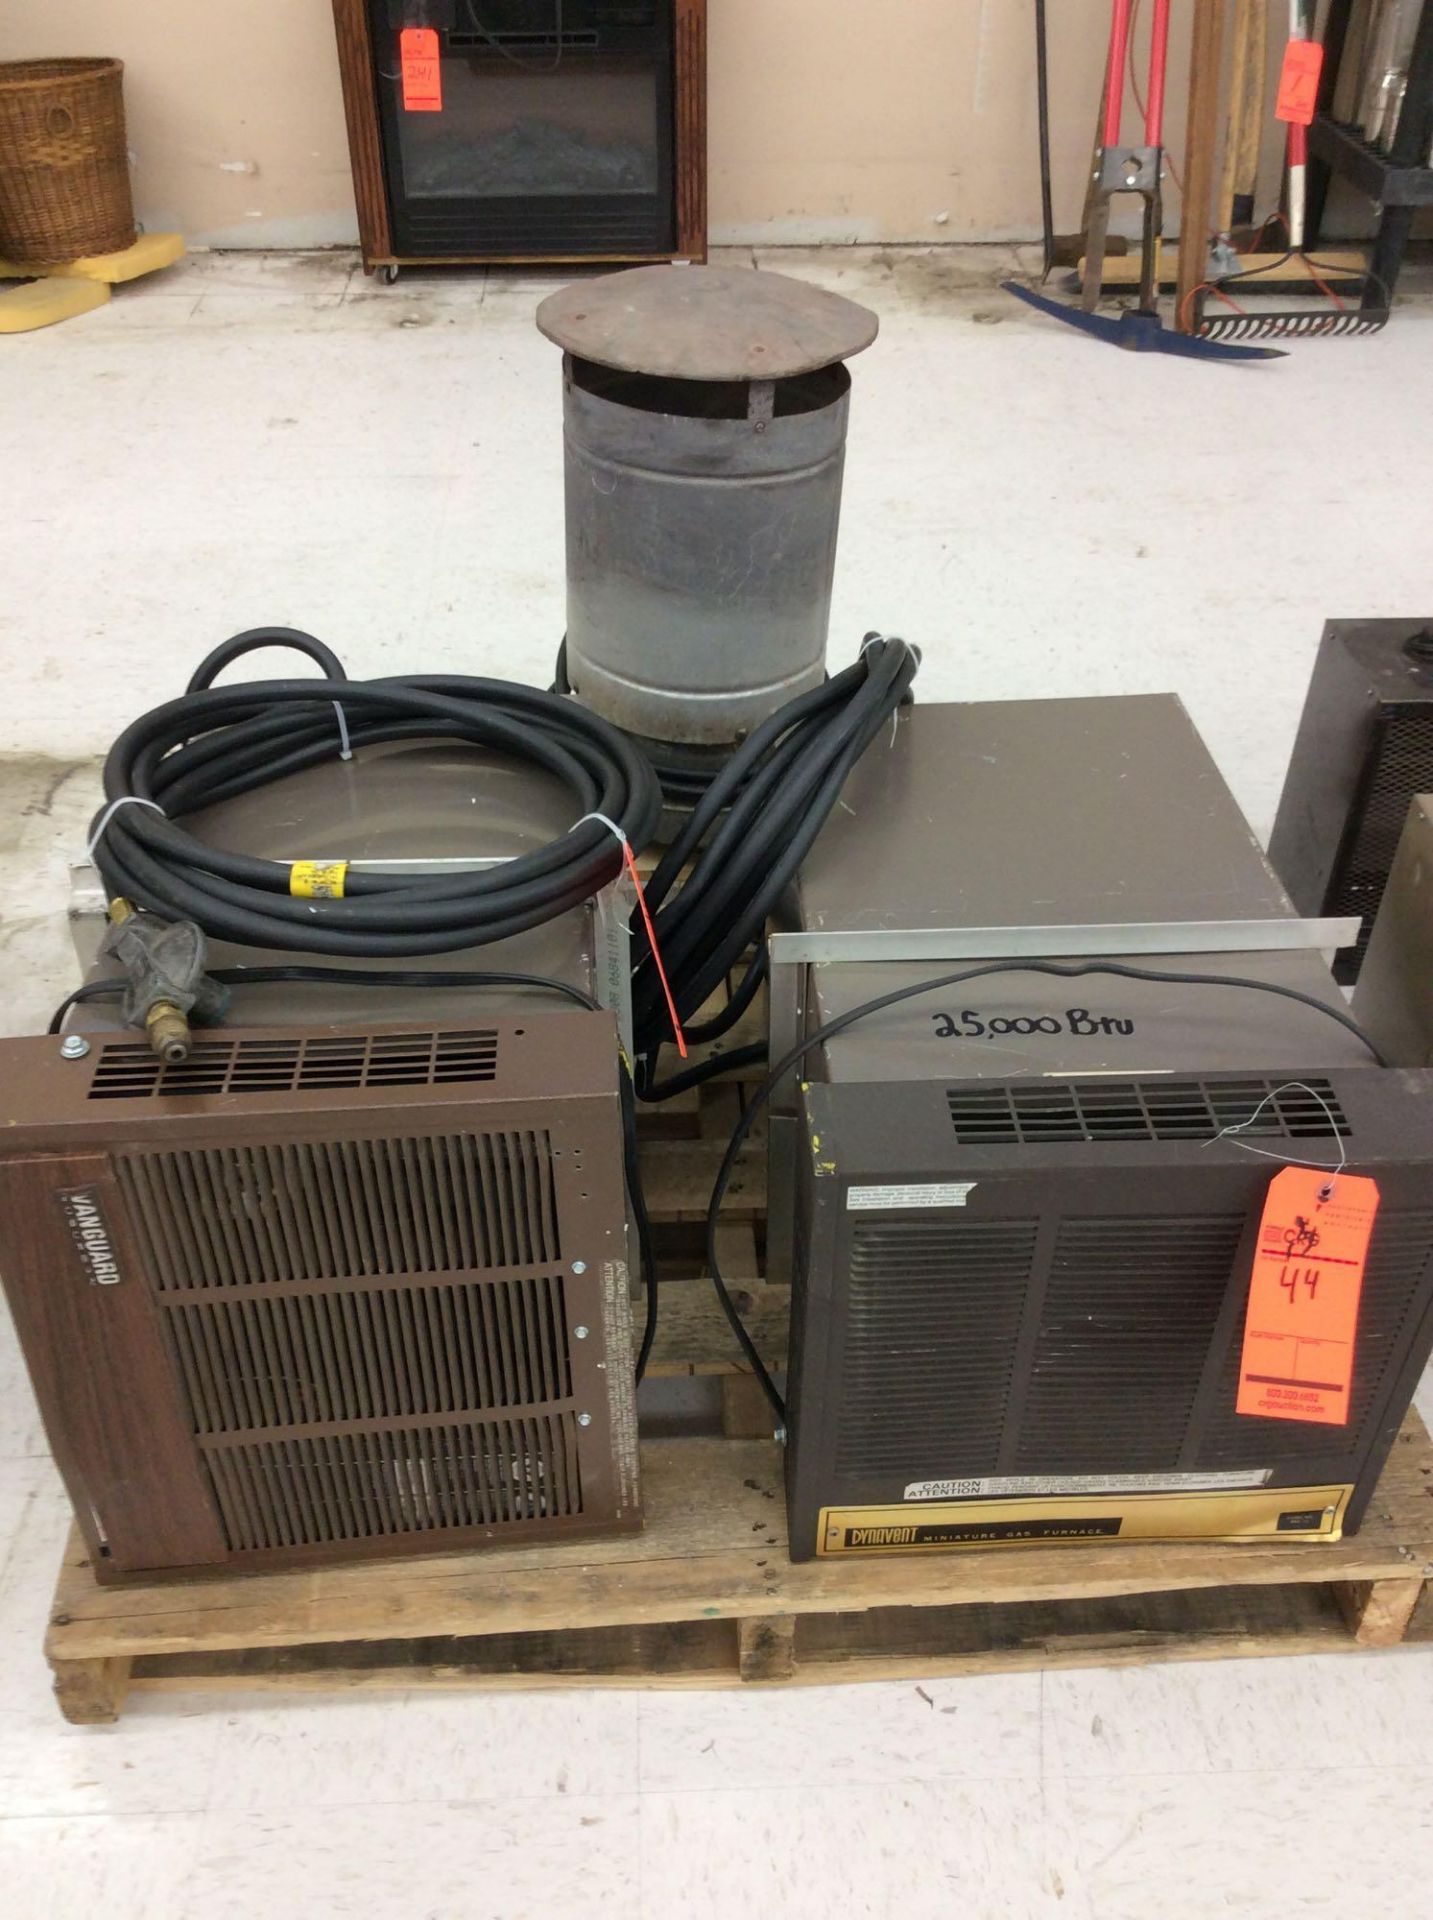 Lot of (3) propane heaters - includes Dynavent 25,000 BTU and Vanguard window mount types, and one